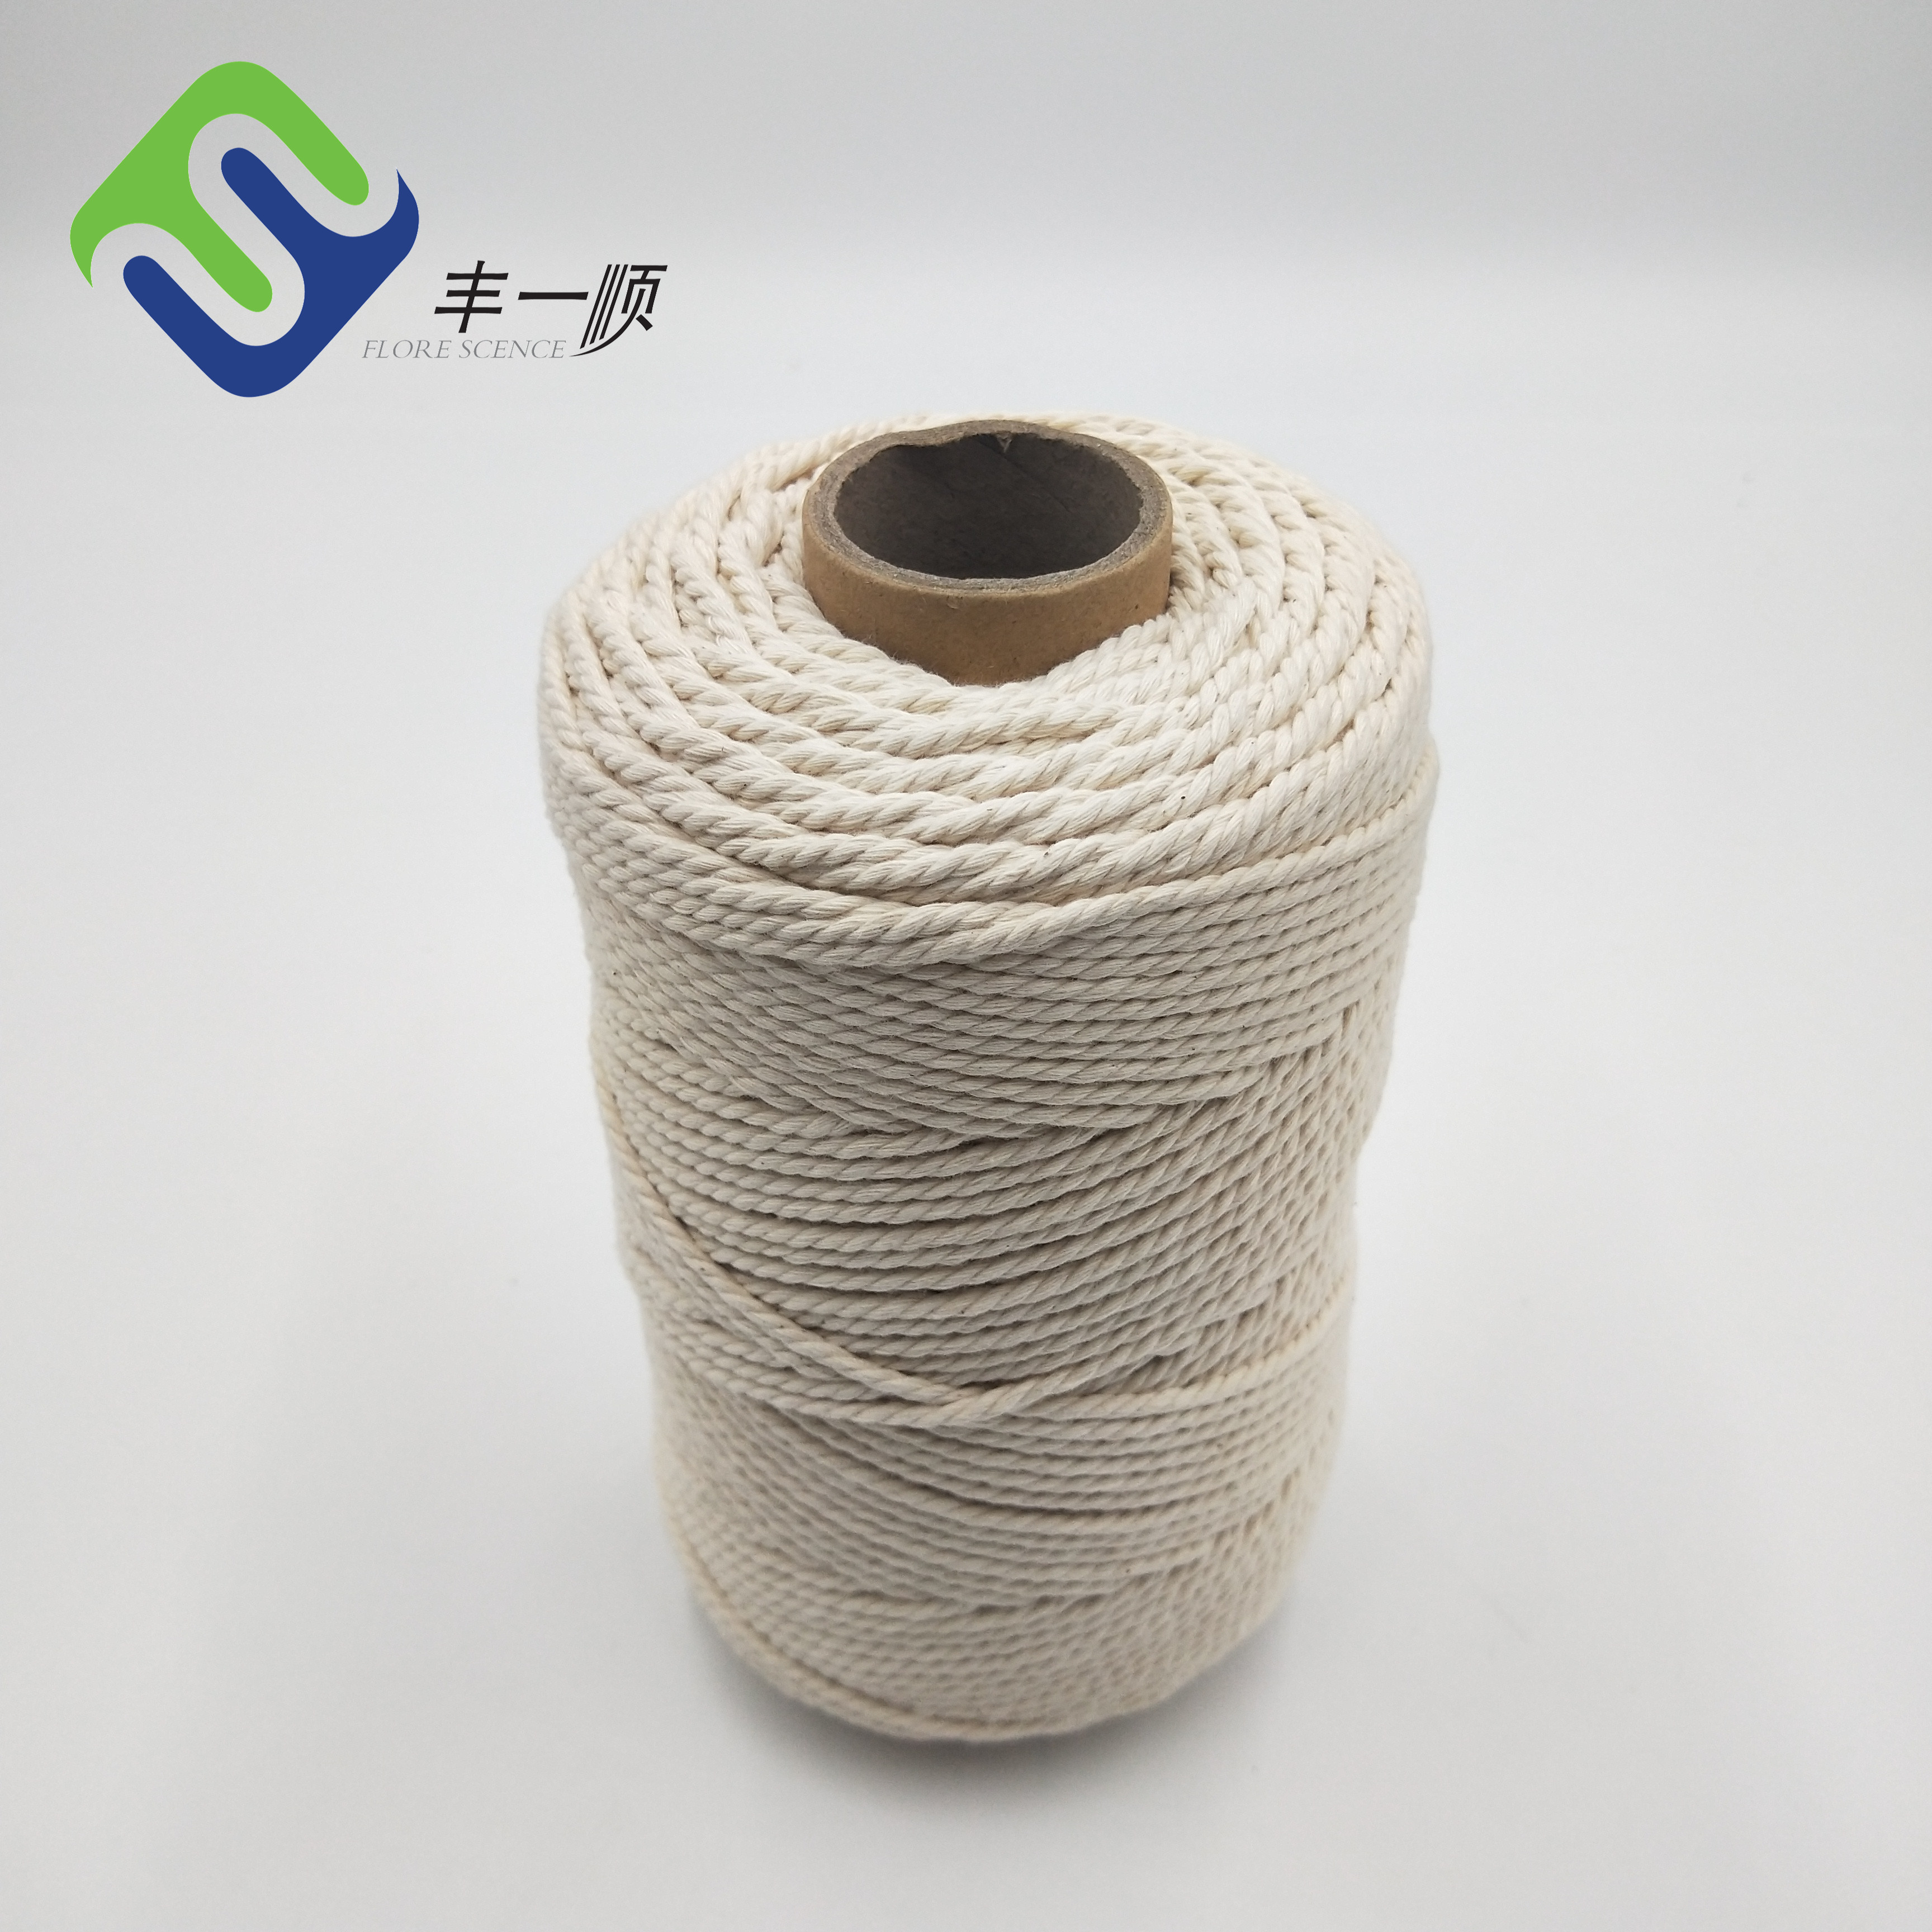 China Gold Supplier for Polypropylene Fiber Rope - 3mm macrame cotton cord 3 strand natural cotton rope  – Florescence